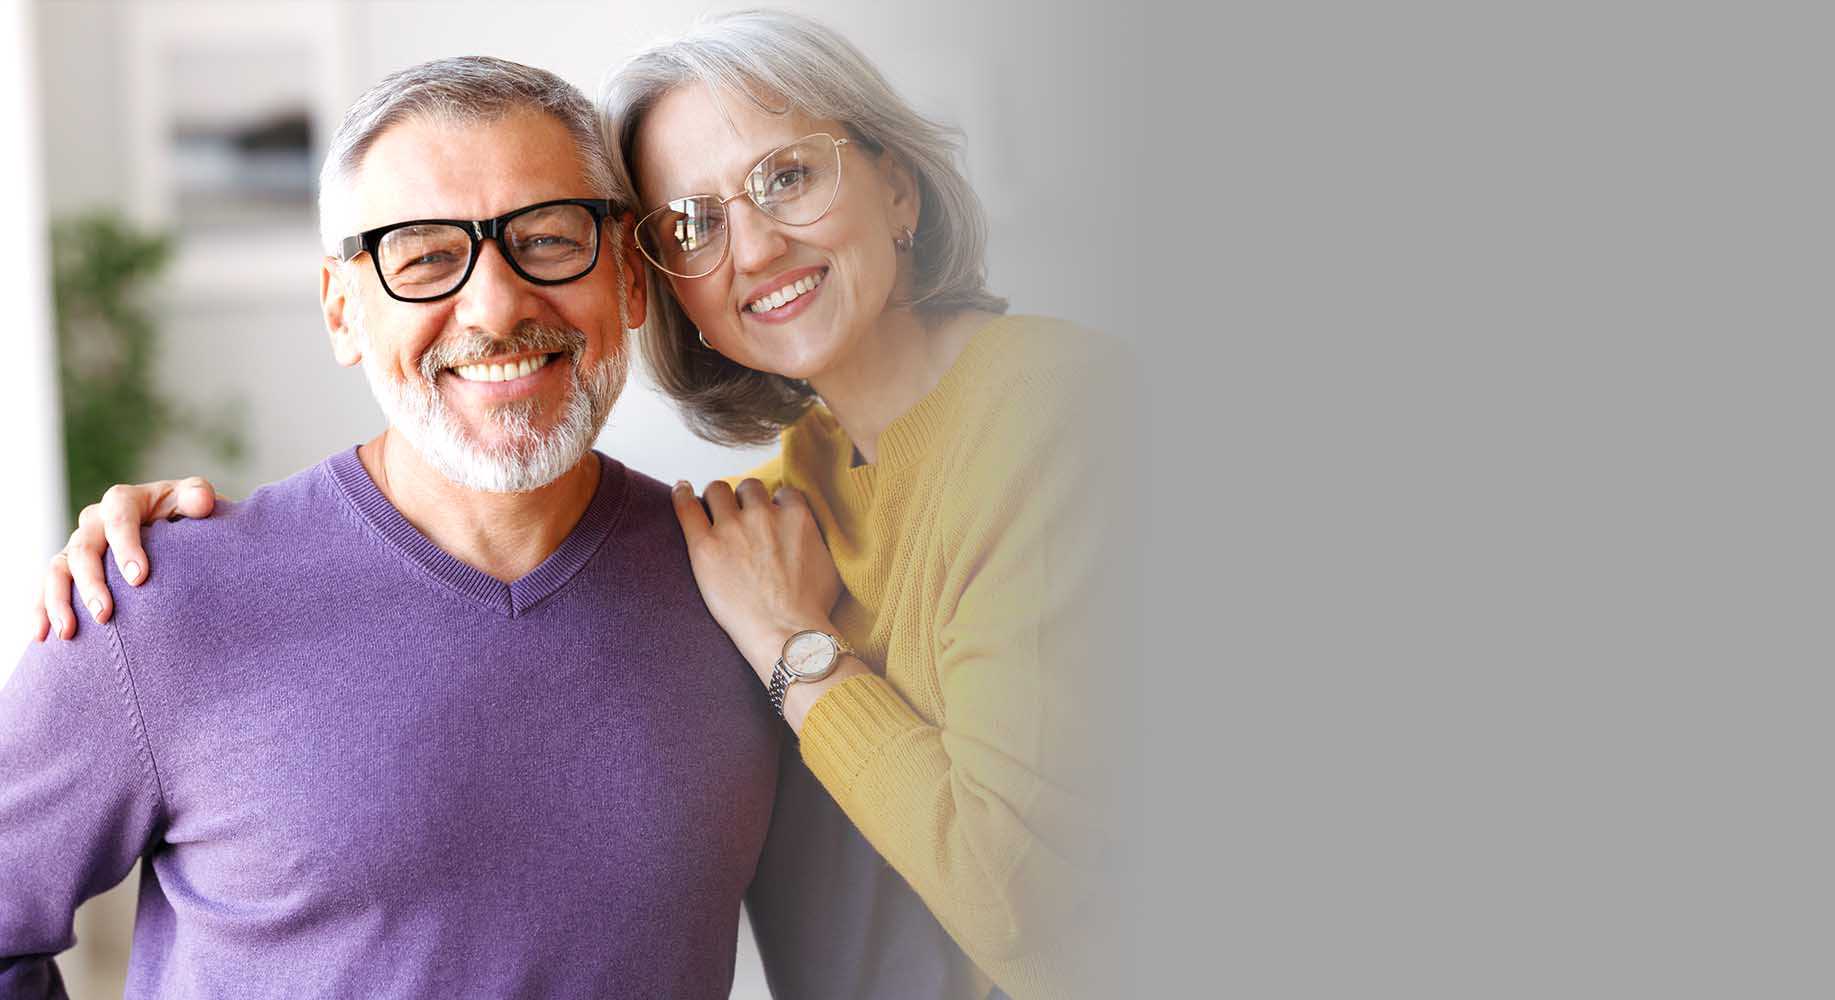 Dental Implants – The Best Way To Permanently Replace Missing Teeth